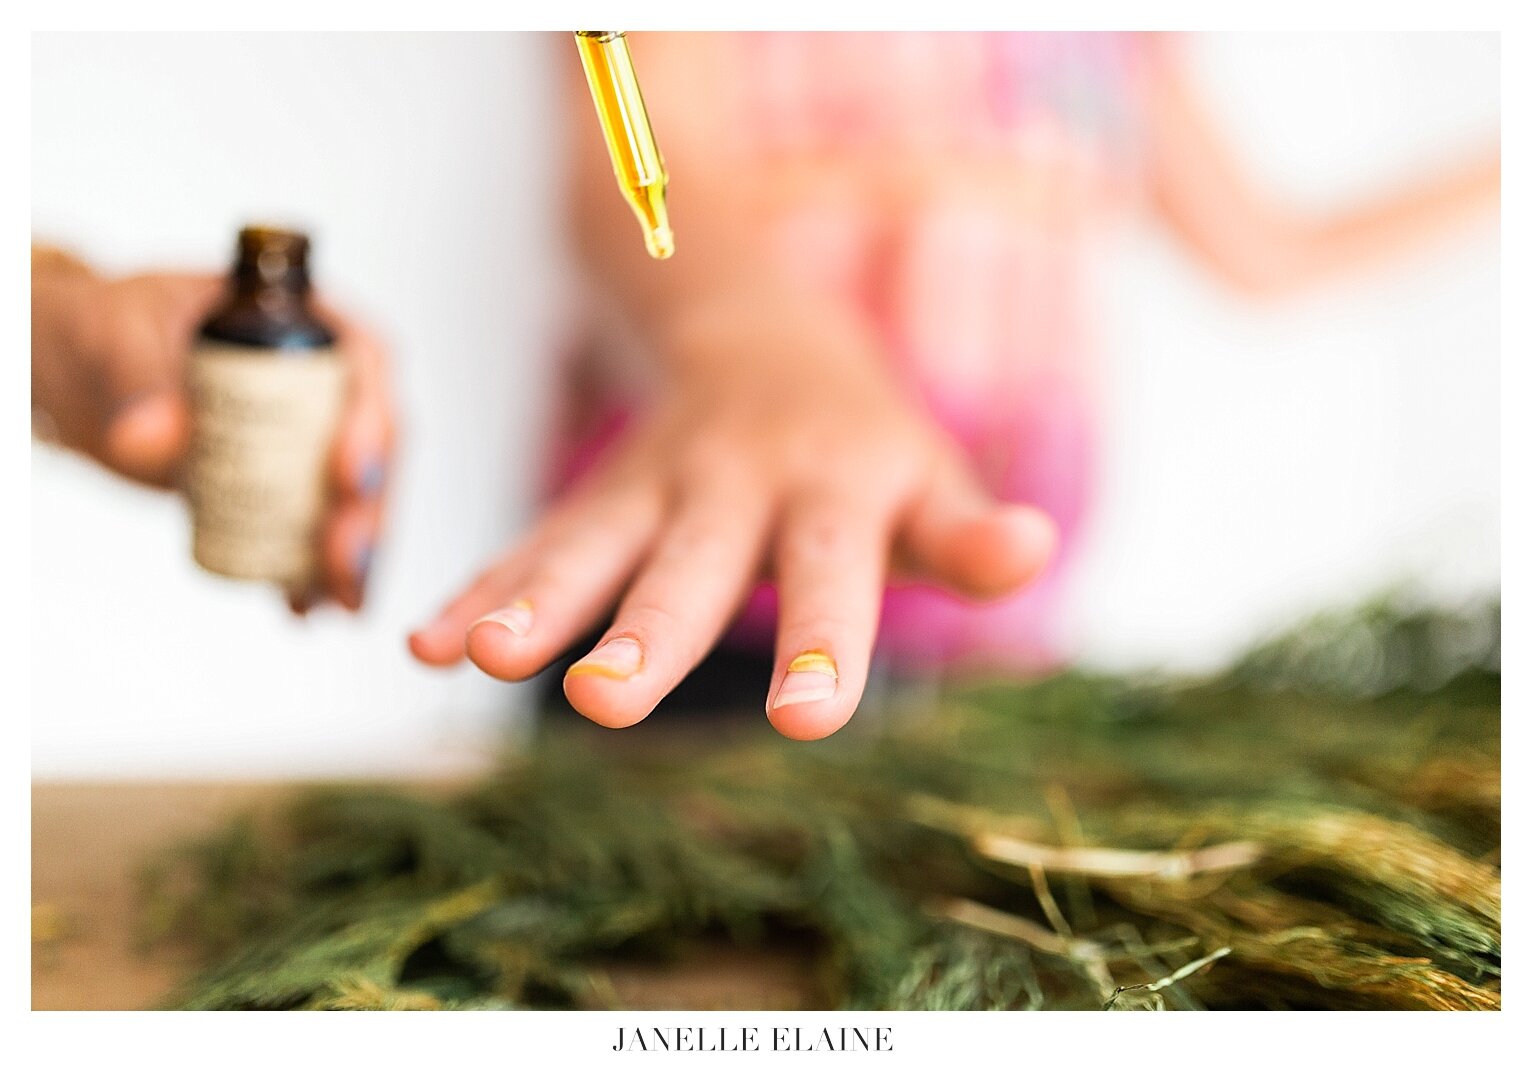 roots-revival-herbal-remedies-products-janelle-elaine-photography-houghton-michigan-157.jpg